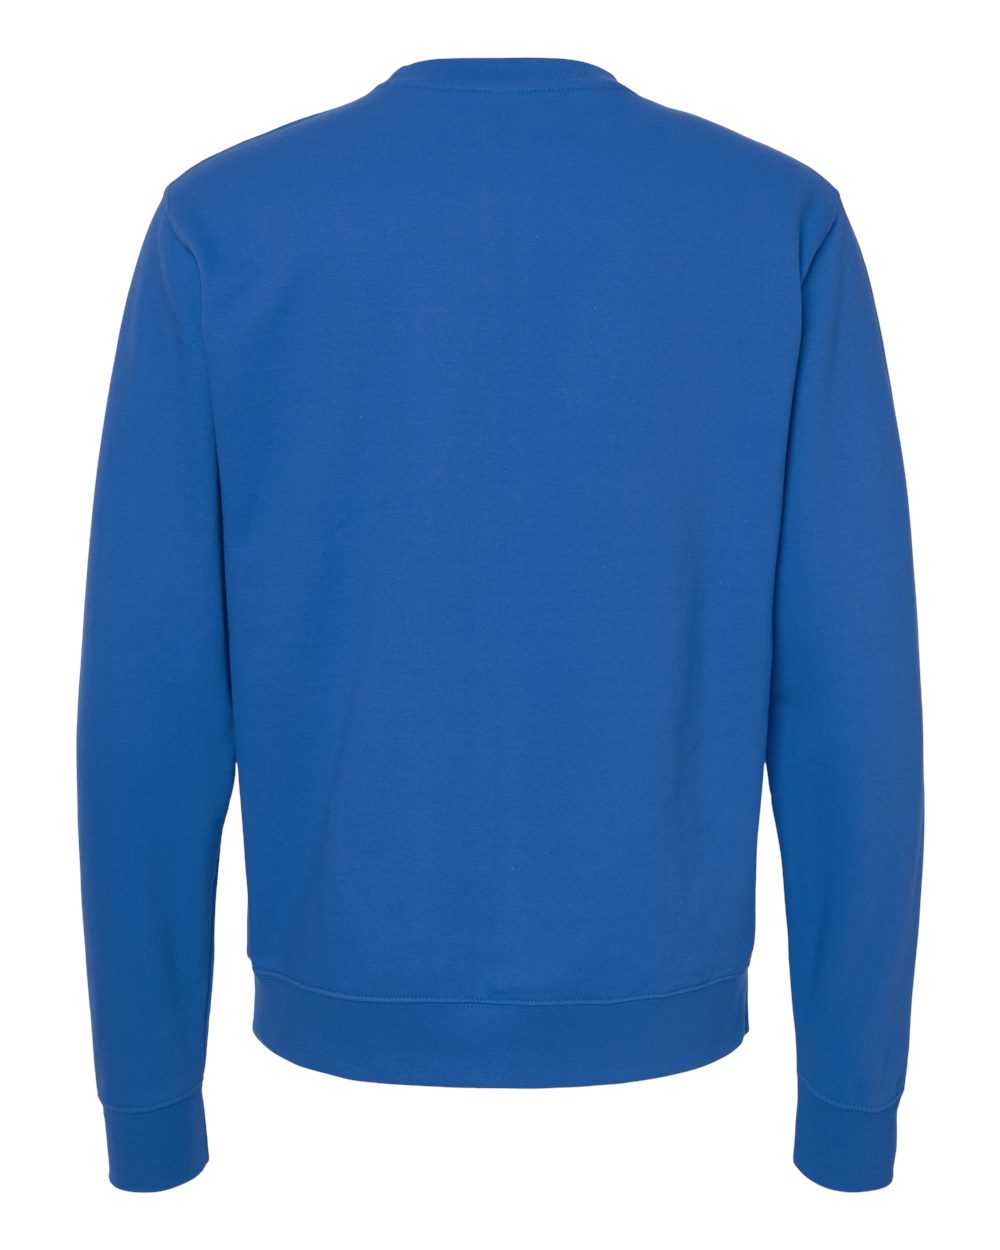 Independent Trading Co SS3000 Midweight Sweatshirt - Royal - HIT a Double - 3